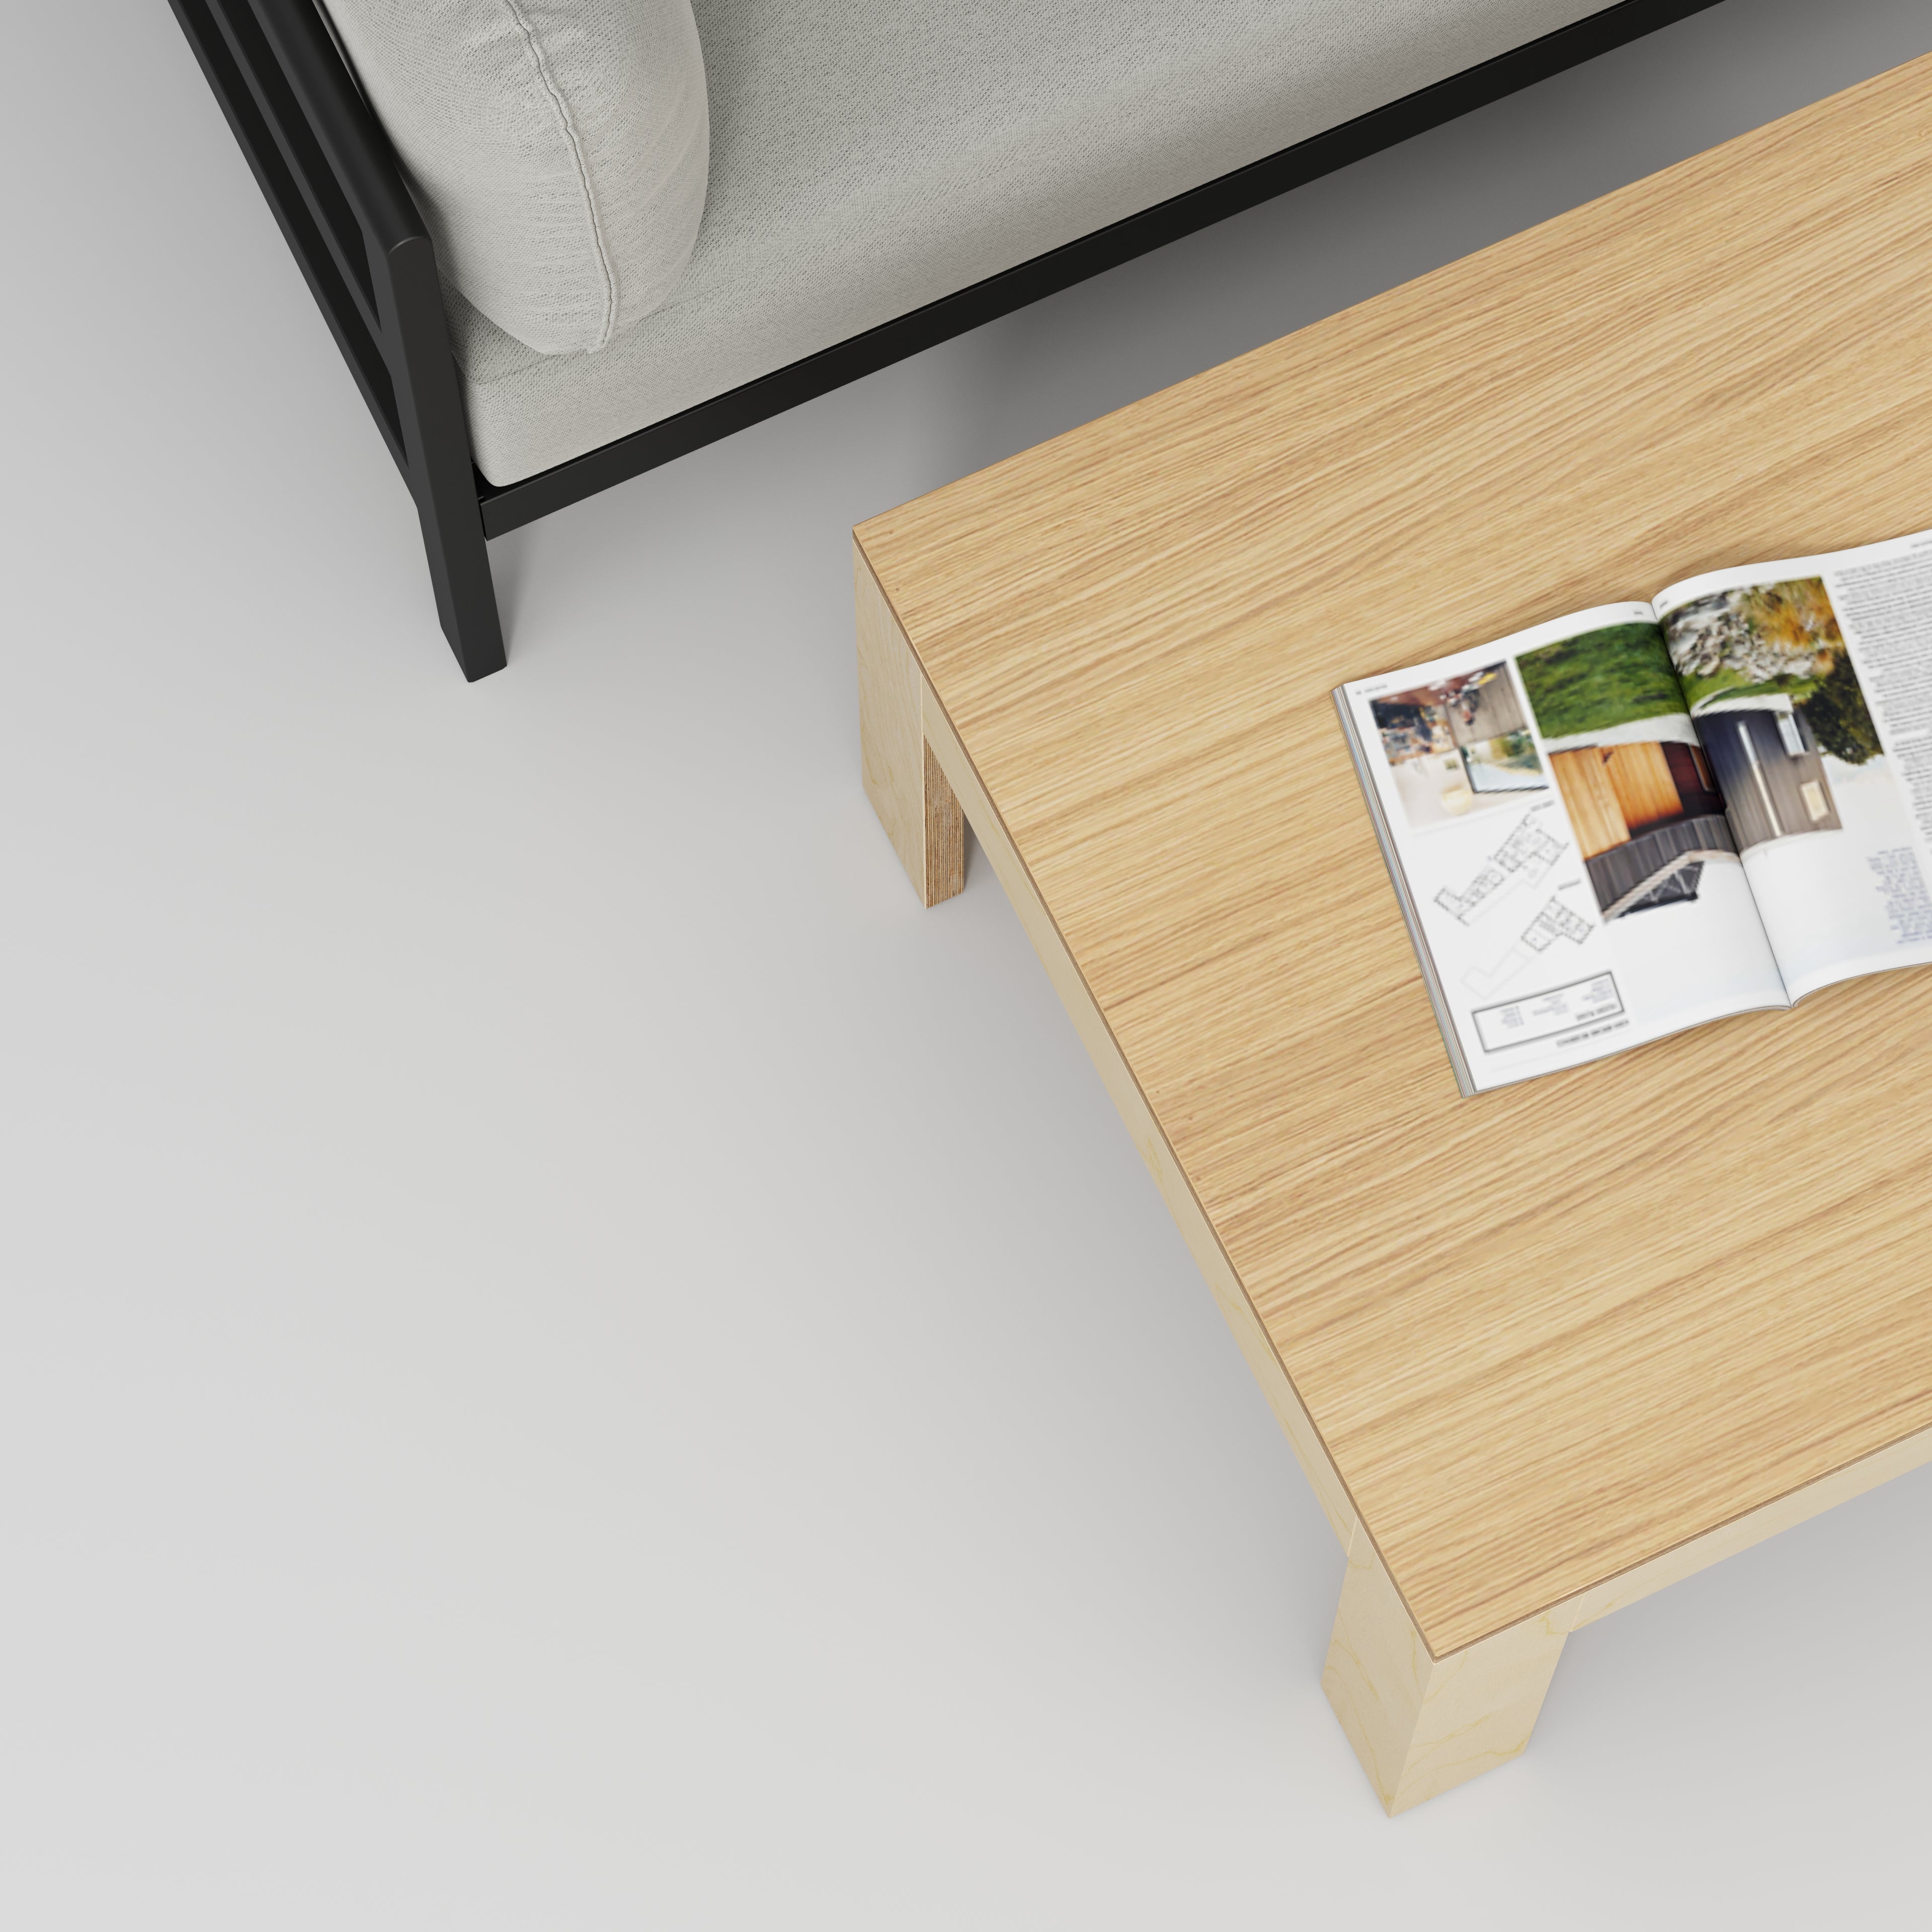 Coffee Table with Solid Frame - Plywood Oak - 800(w) x 800(d) x 450(h)